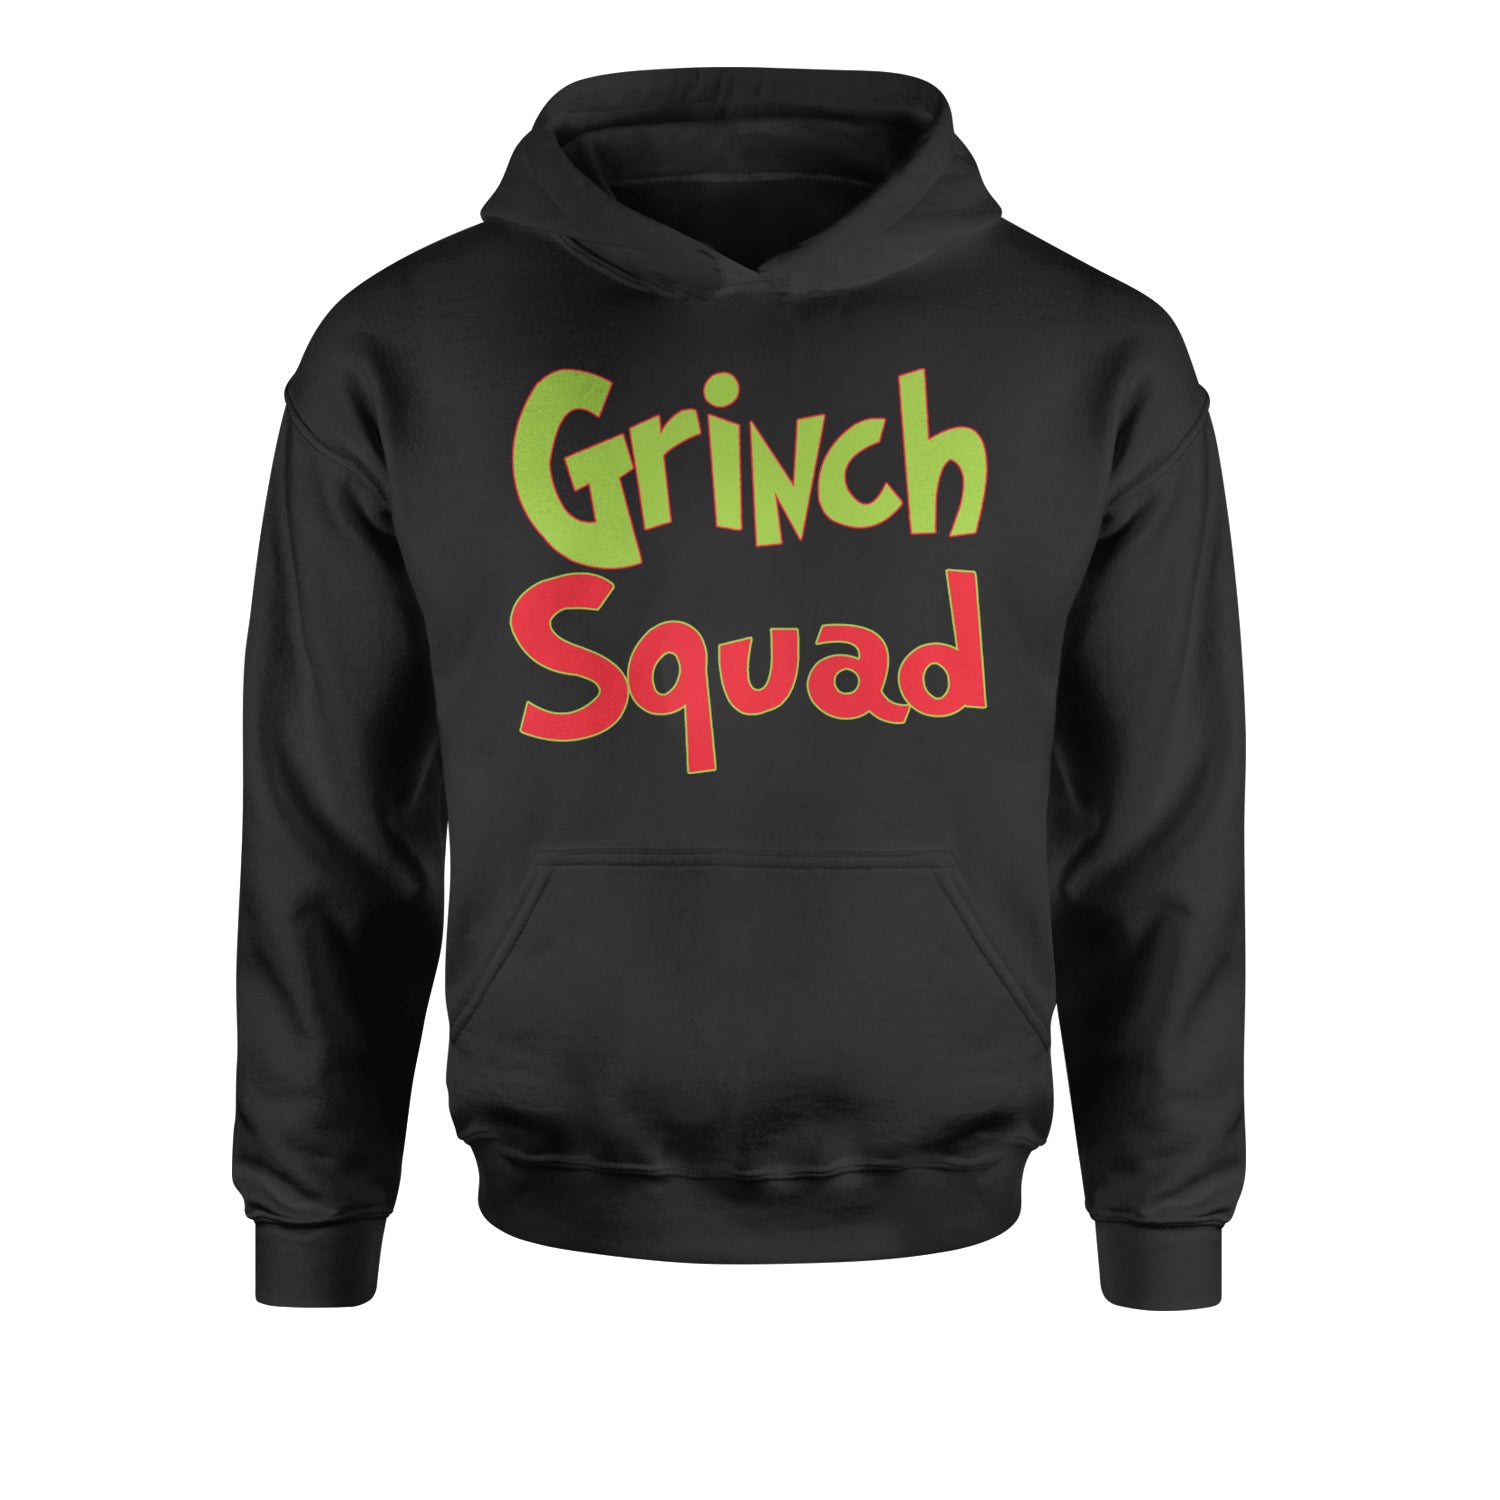 Gr-nch Squad Jolly Grinchmas Merry Christmas Youth-Sized Hoodie